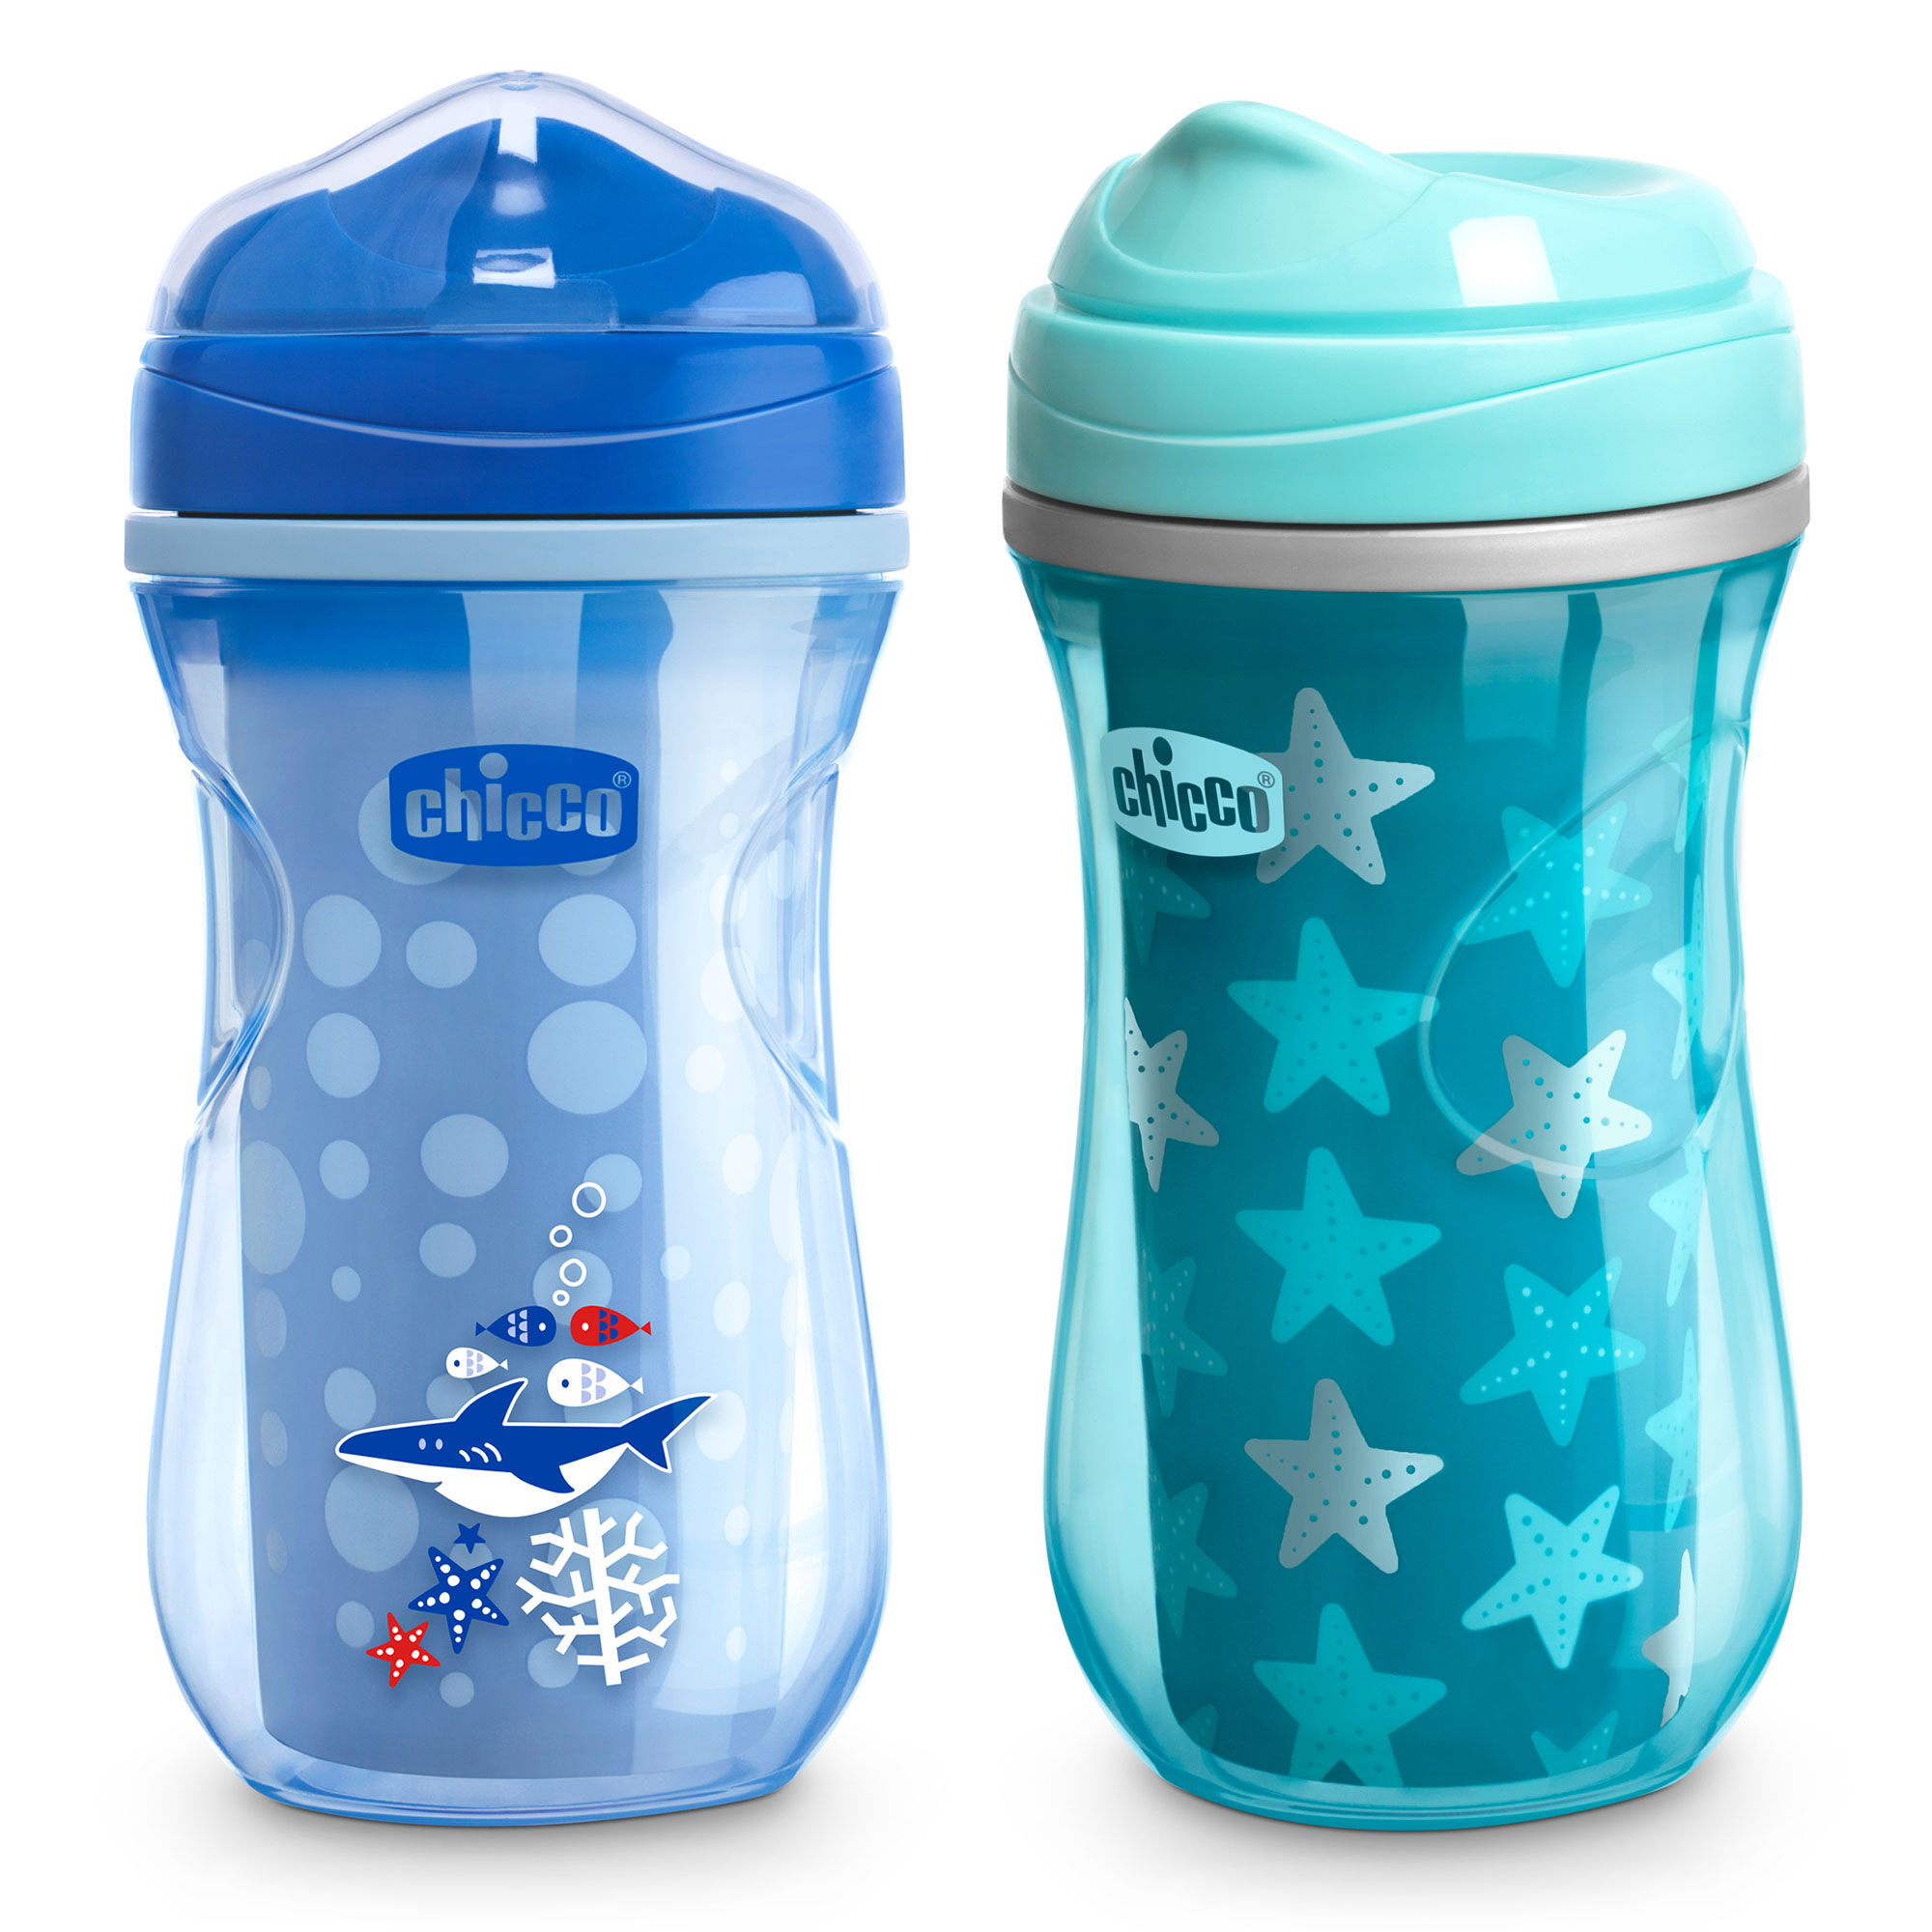 https://www.chiccousa.com/dw/image/v2/AAMT_PRD/on/demandware.static/-/Sites-chicco_catalog/default/dw360cfddc/images/products/Nursing/Feeding_2019/chicco-insulated-rim-spout-2019-teal-blue.jpg?sw=2000&sh=2000&sm=fit